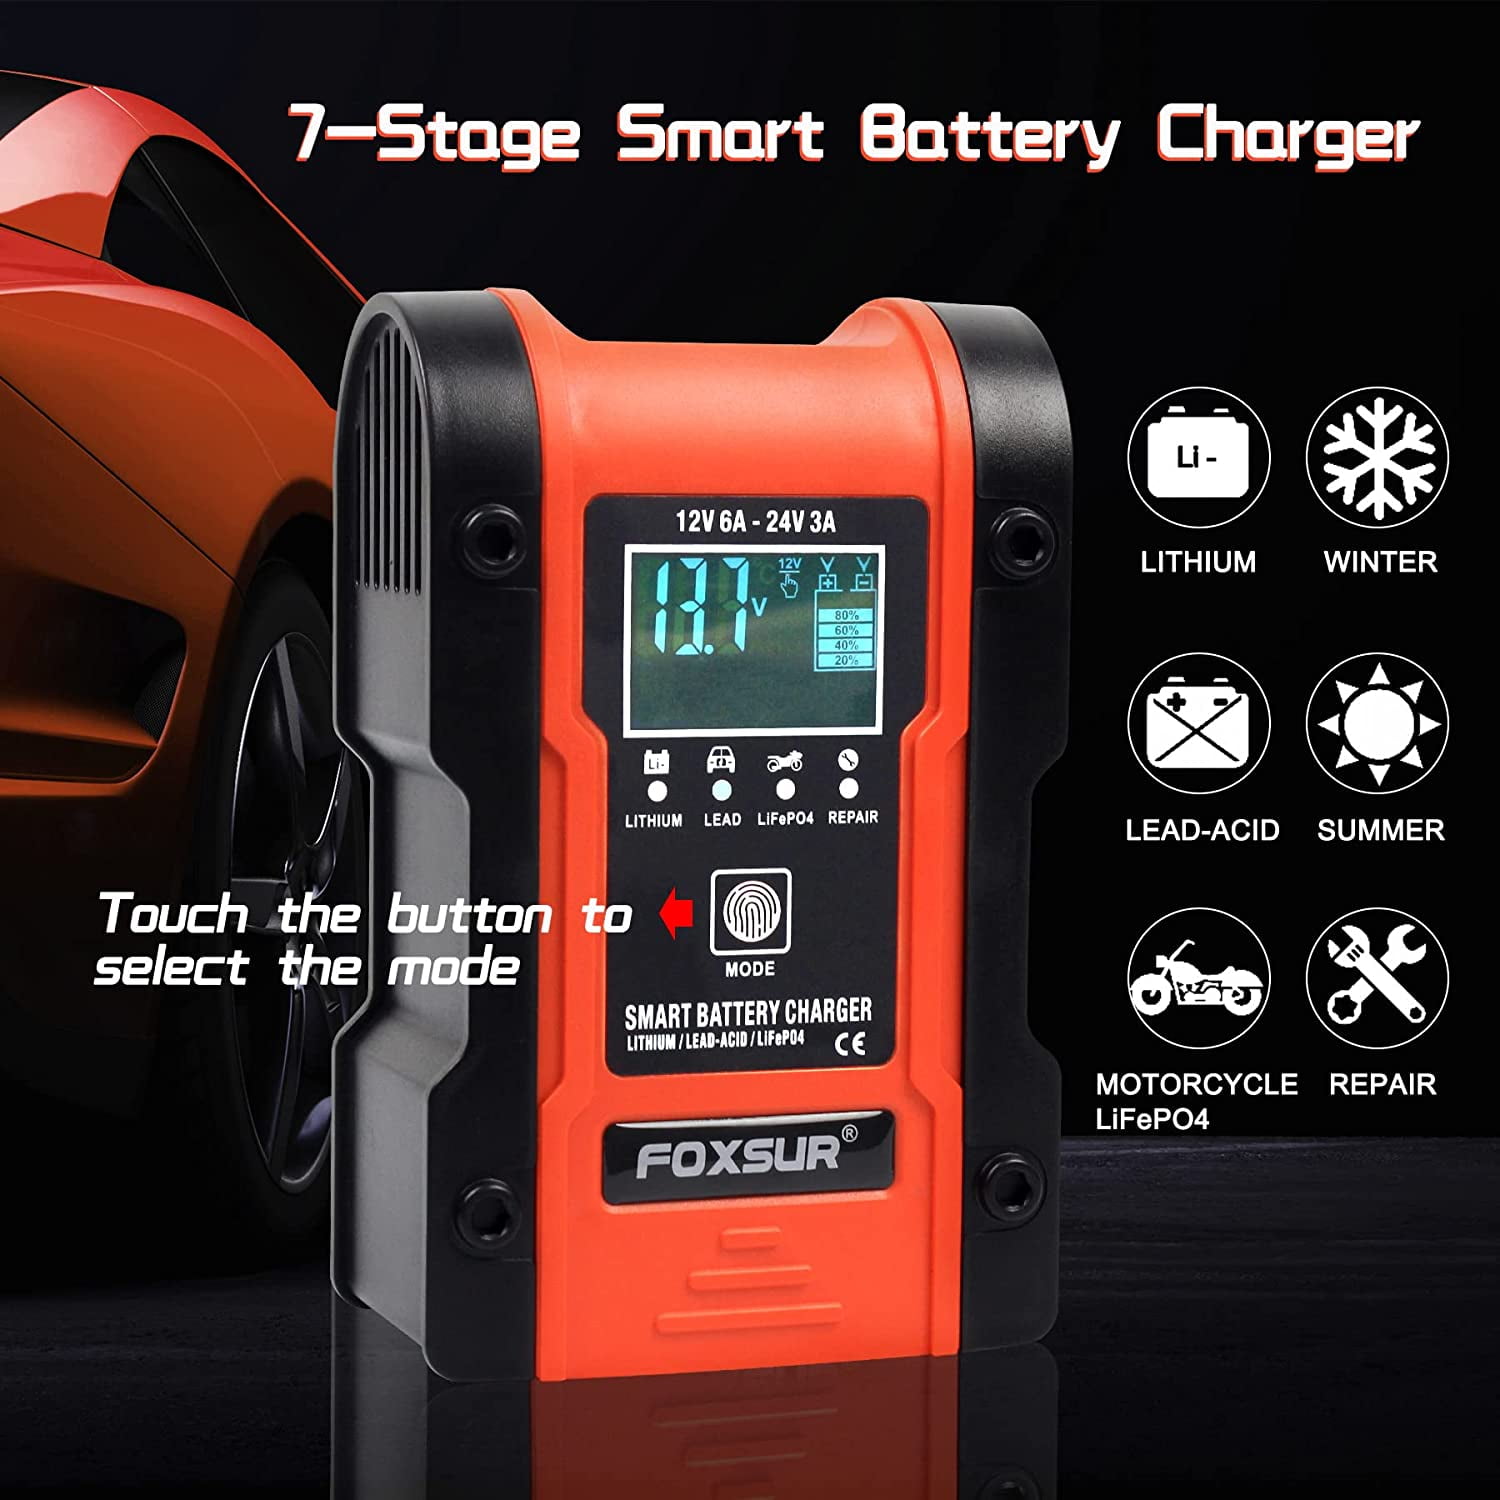 LiFePO4 Battery Lawn Mower Motorcycle Truck Automotive Battery Charger and Maintainer 12V 6A / 24V 3A Smart Battery Charger for Car Lead-Acid Automatic Trickle Charger for Lithium 